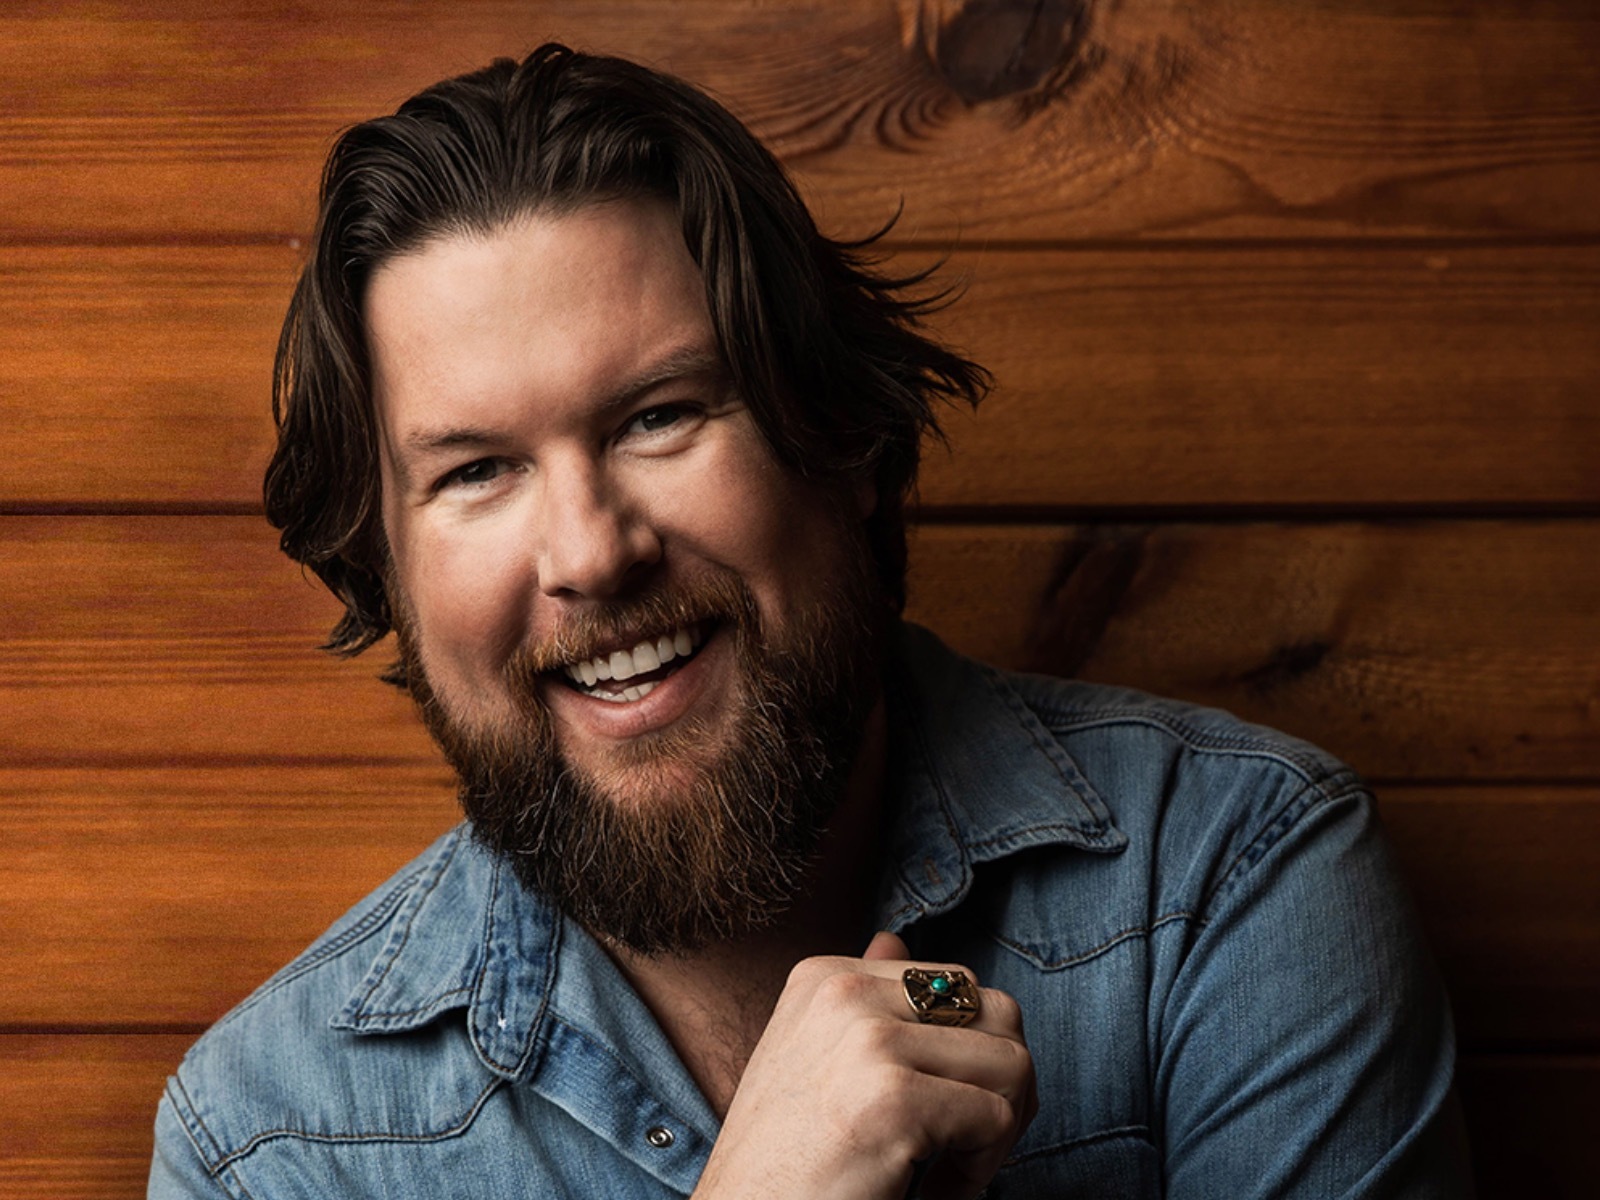 State Fair adds Christian country star Zach Williams to Main Stage lineup